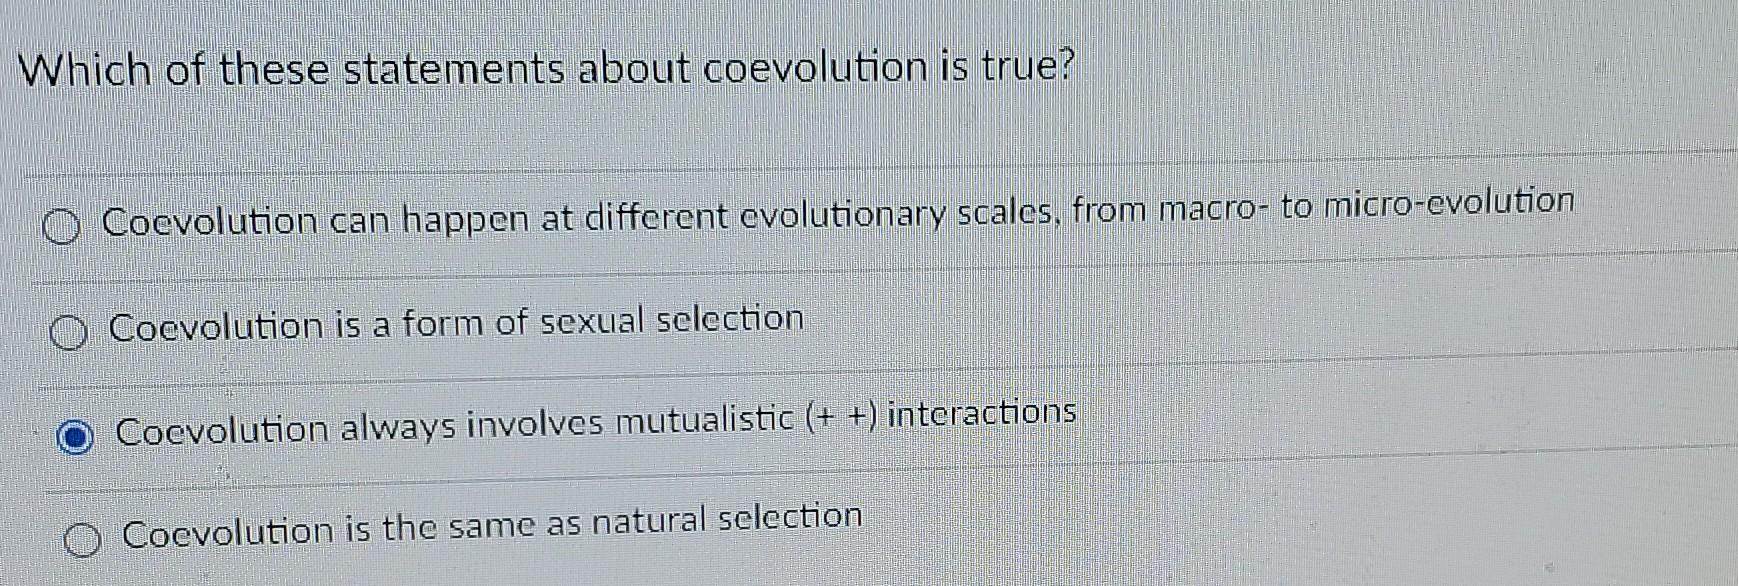 Evolution at different scales: micro to macro - Understanding